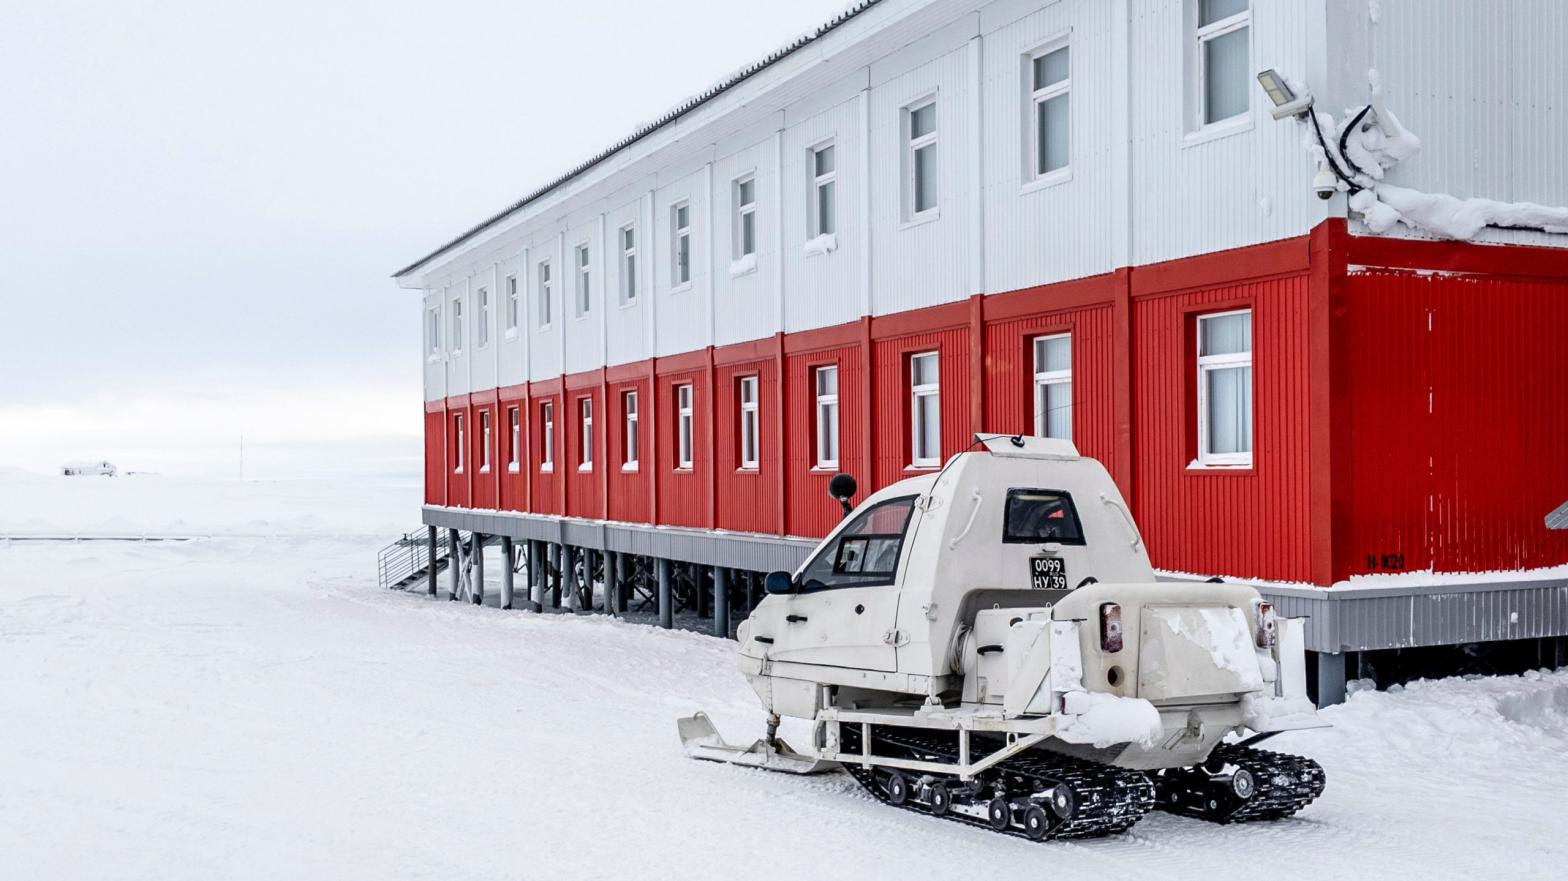 A snowmobile is parked next to a building at the Russian northern military base on Kotelny island. (Photo: Maxime Popov / AFP, Getty Images)